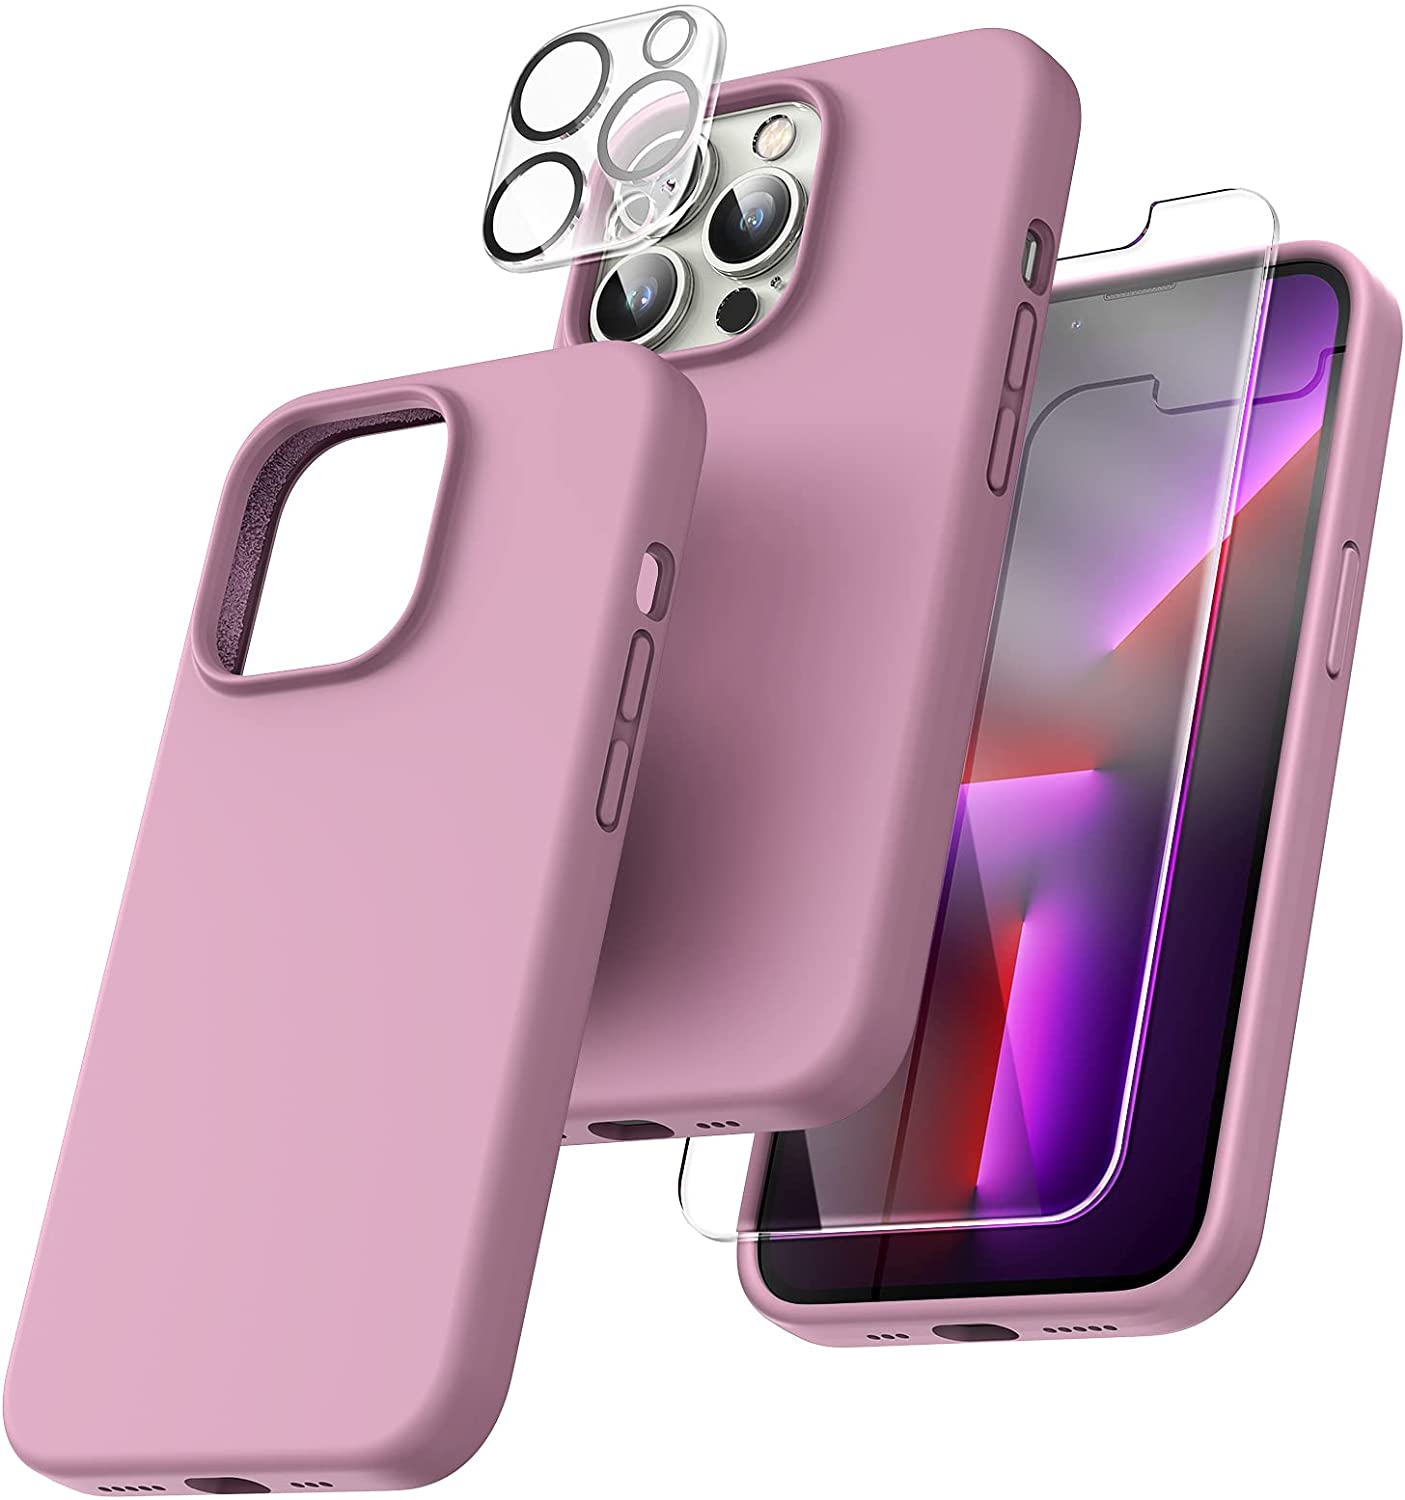 TOCOL [5 in 1] for iPhone 13 Pro Case, with 2 Pack Screen Protector + 2 Pack Camera Lens Protector, Slim Silicone Phone Case iPhone 13 Pro 6.1 Inch, [Anti-Scratch] [Drop Protection], Lilac Purple